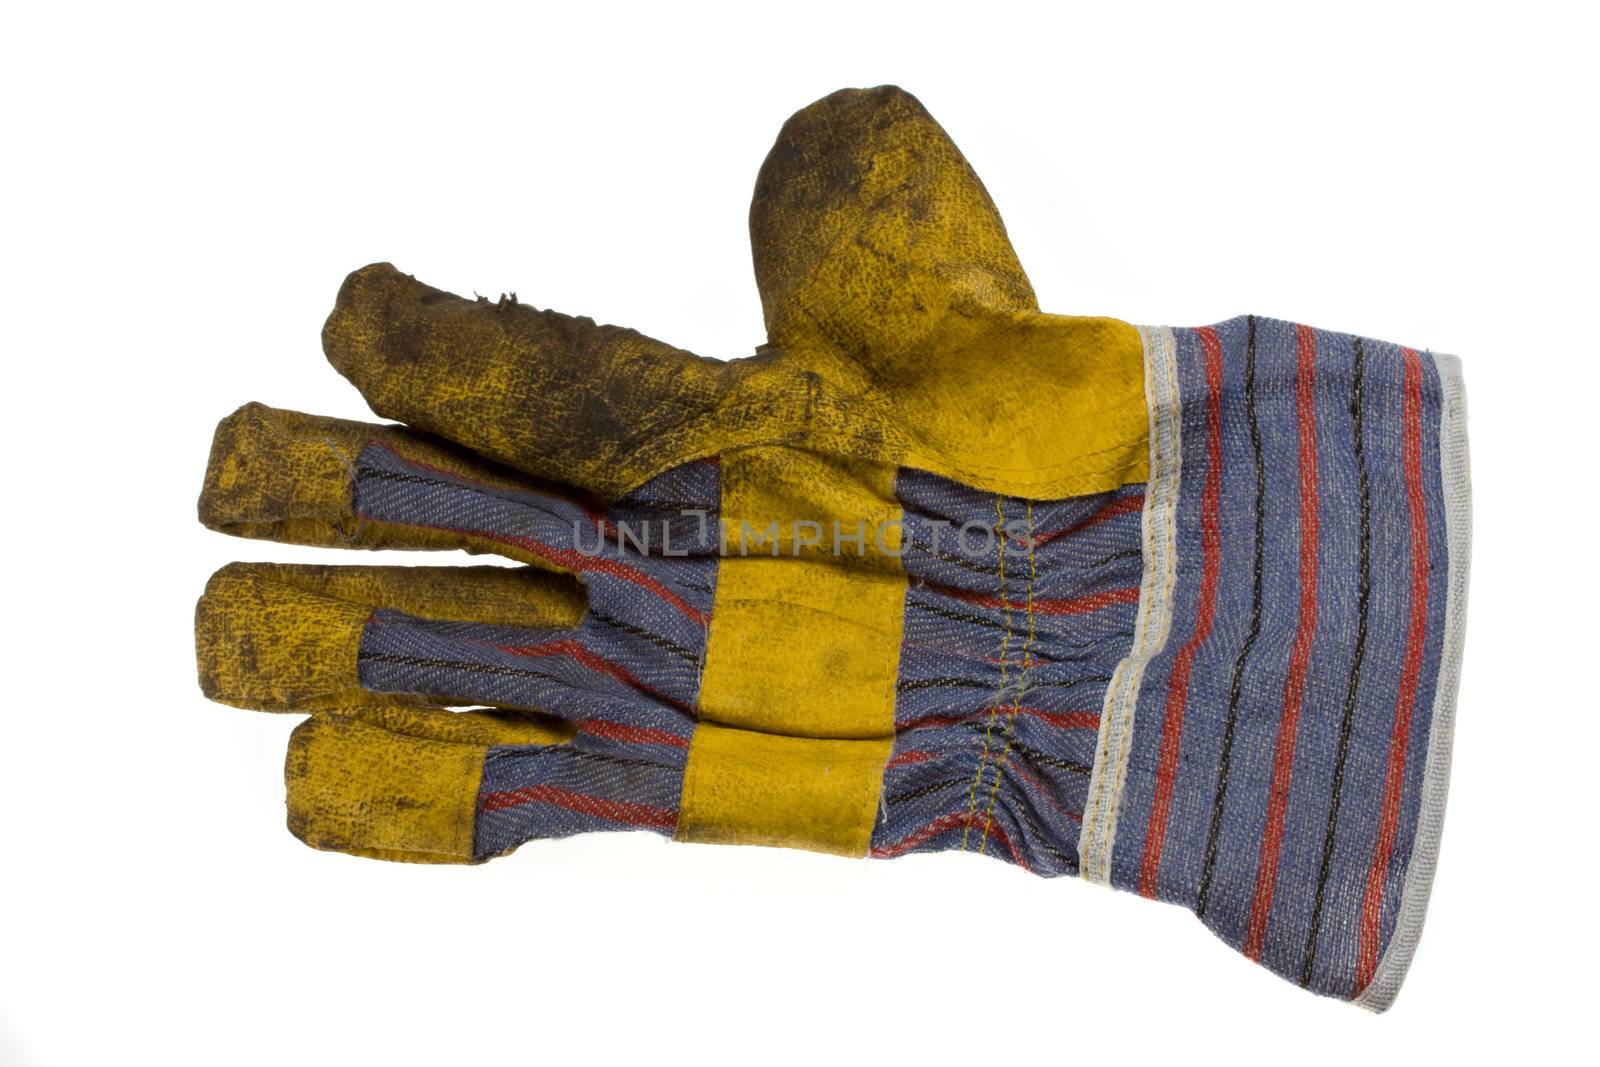 single dirty used work glove isolated on white background by bernjuer